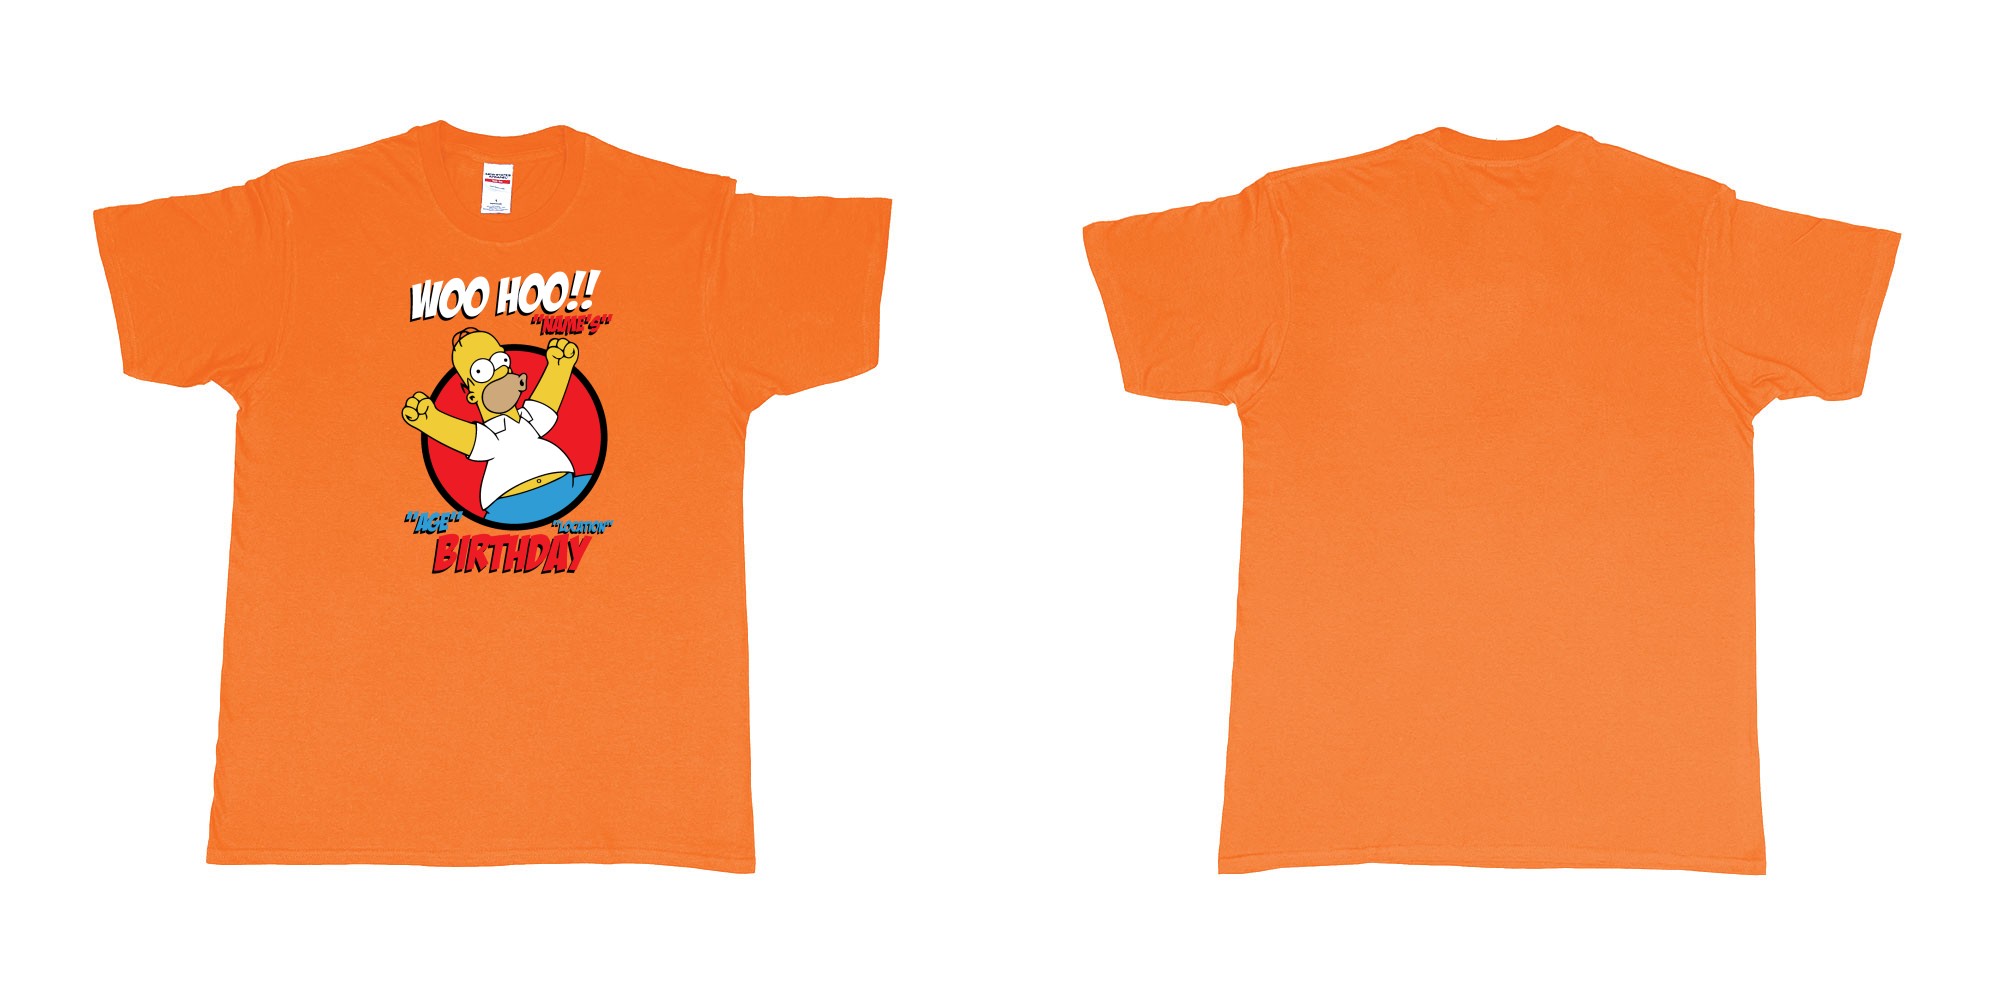 Custom tshirt design homer simpson woo hoo custom age name birthday in fabric color orange choice your own text made in Bali by The Pirate Way